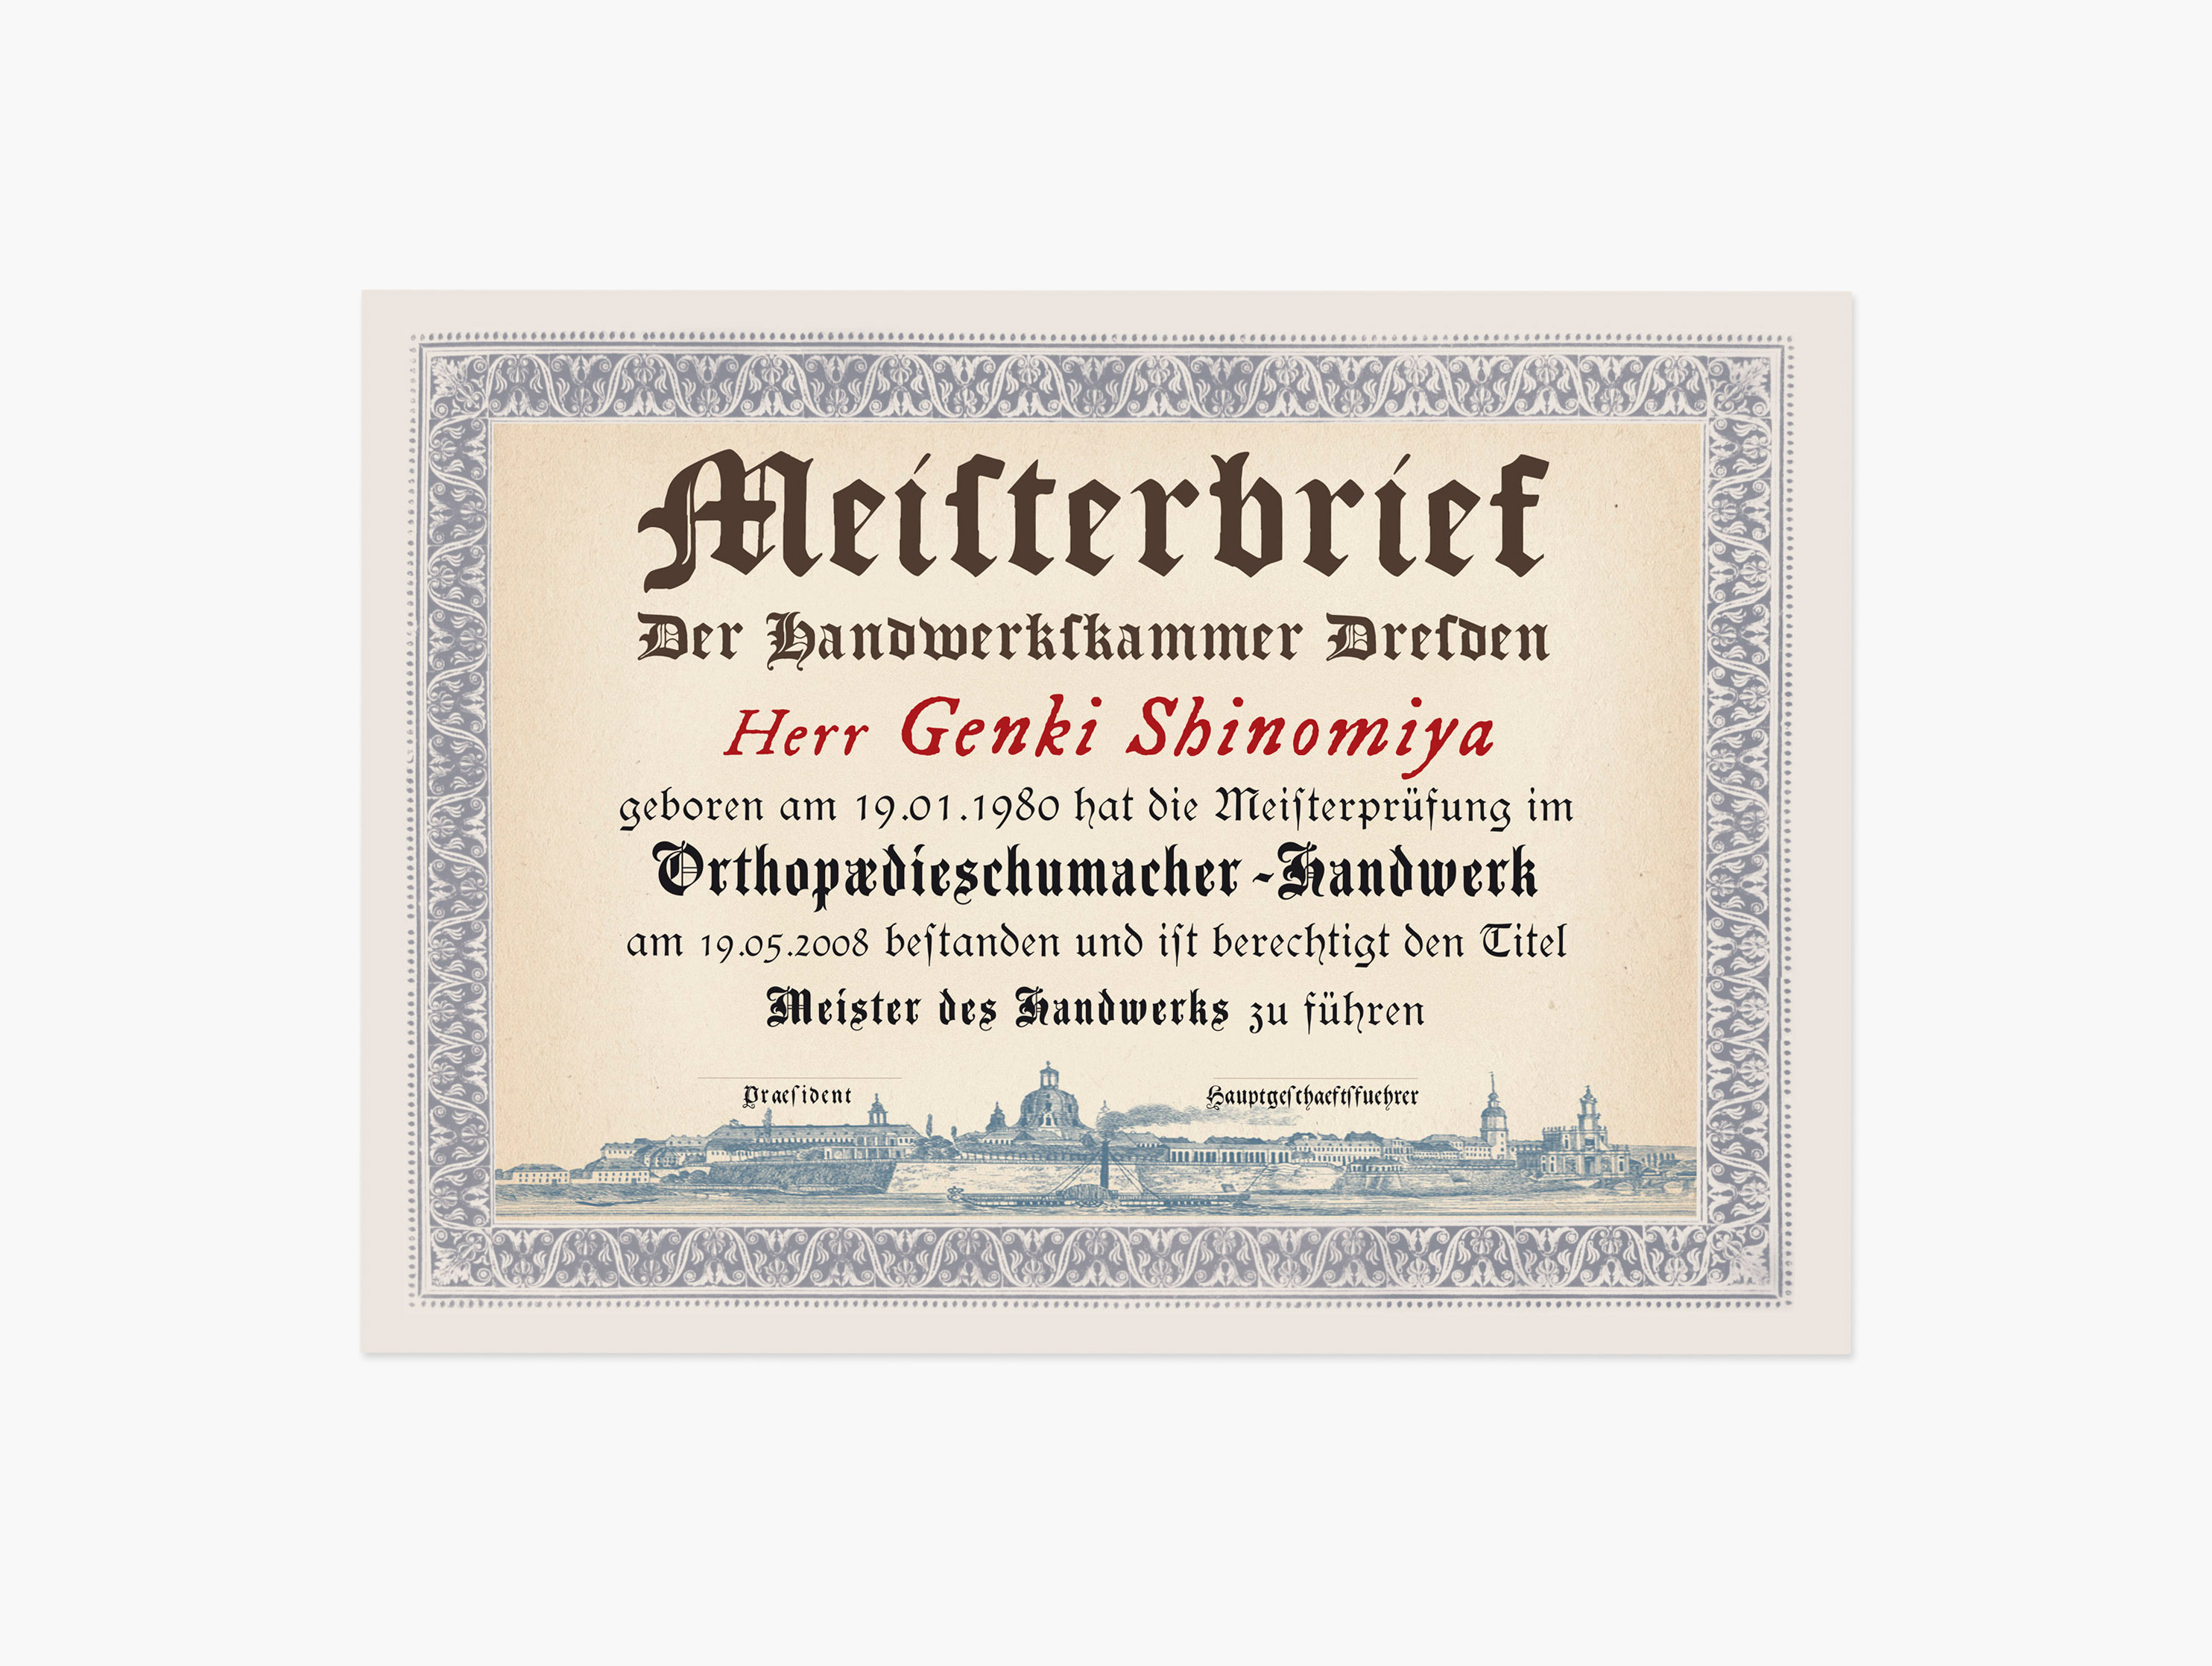 Text in german type. Framed by decorative grapical elements. Copper engraving-like illustration of an city skyline underneath text.